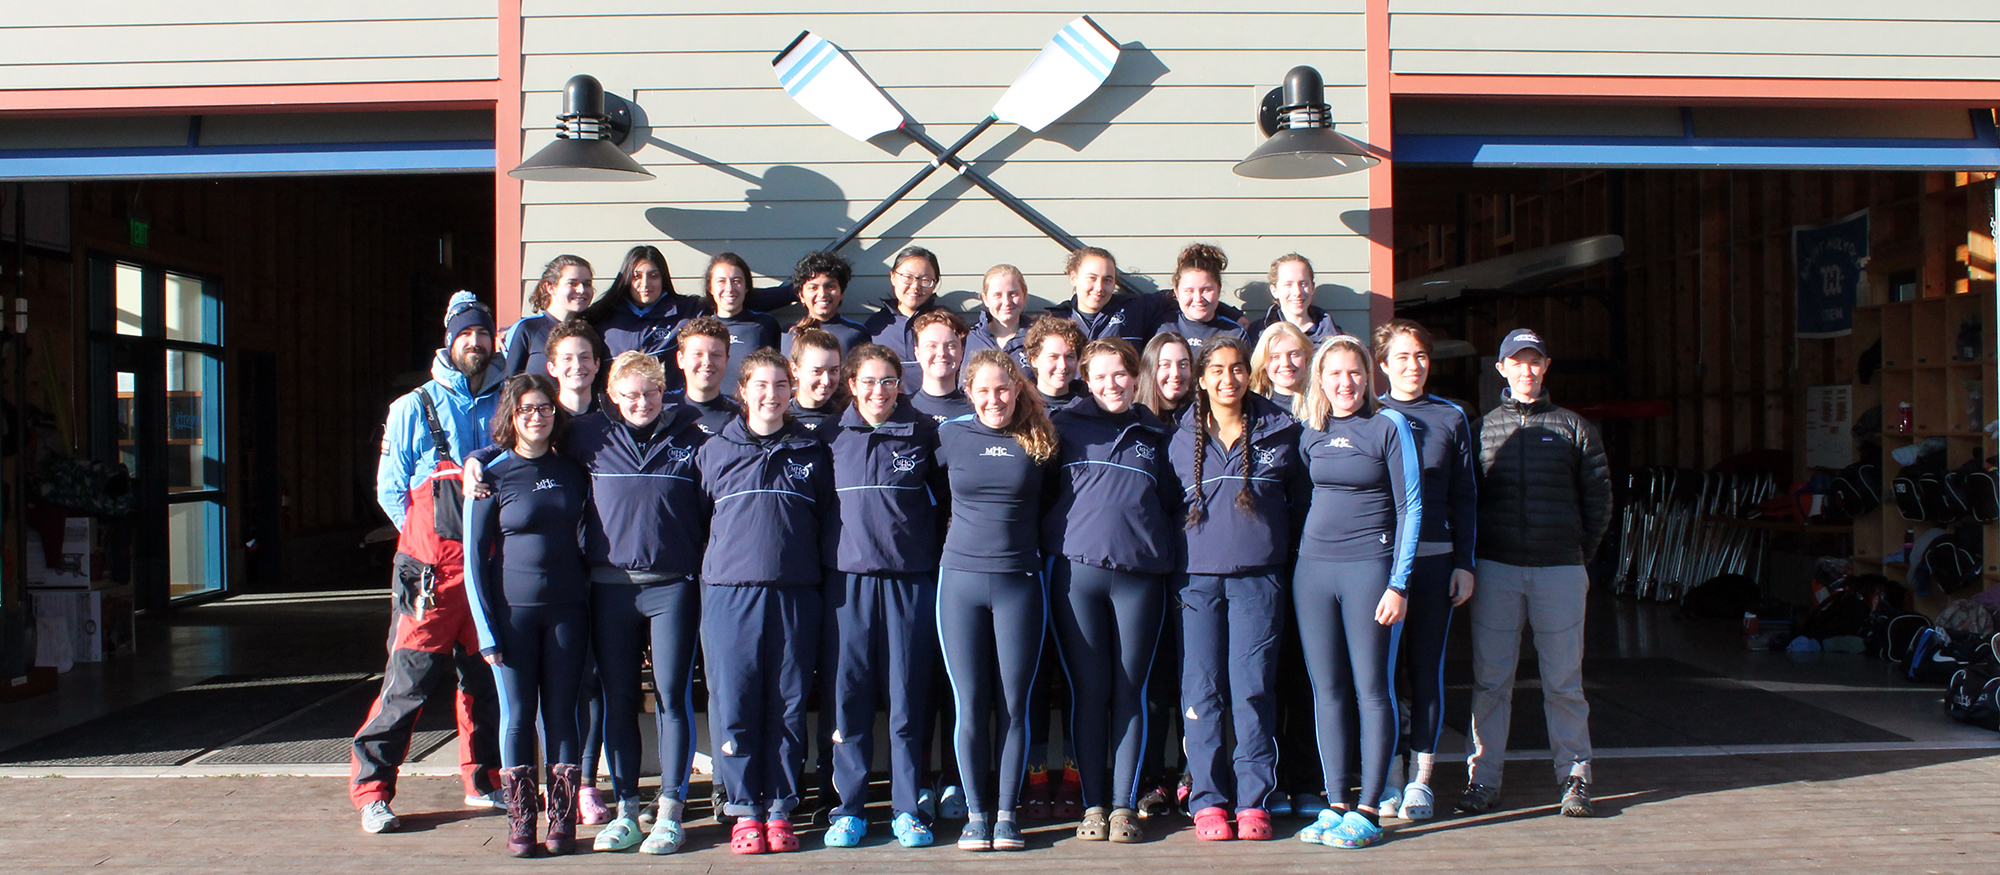 Group photo of the 2018-19 Lyons Rowing Team.